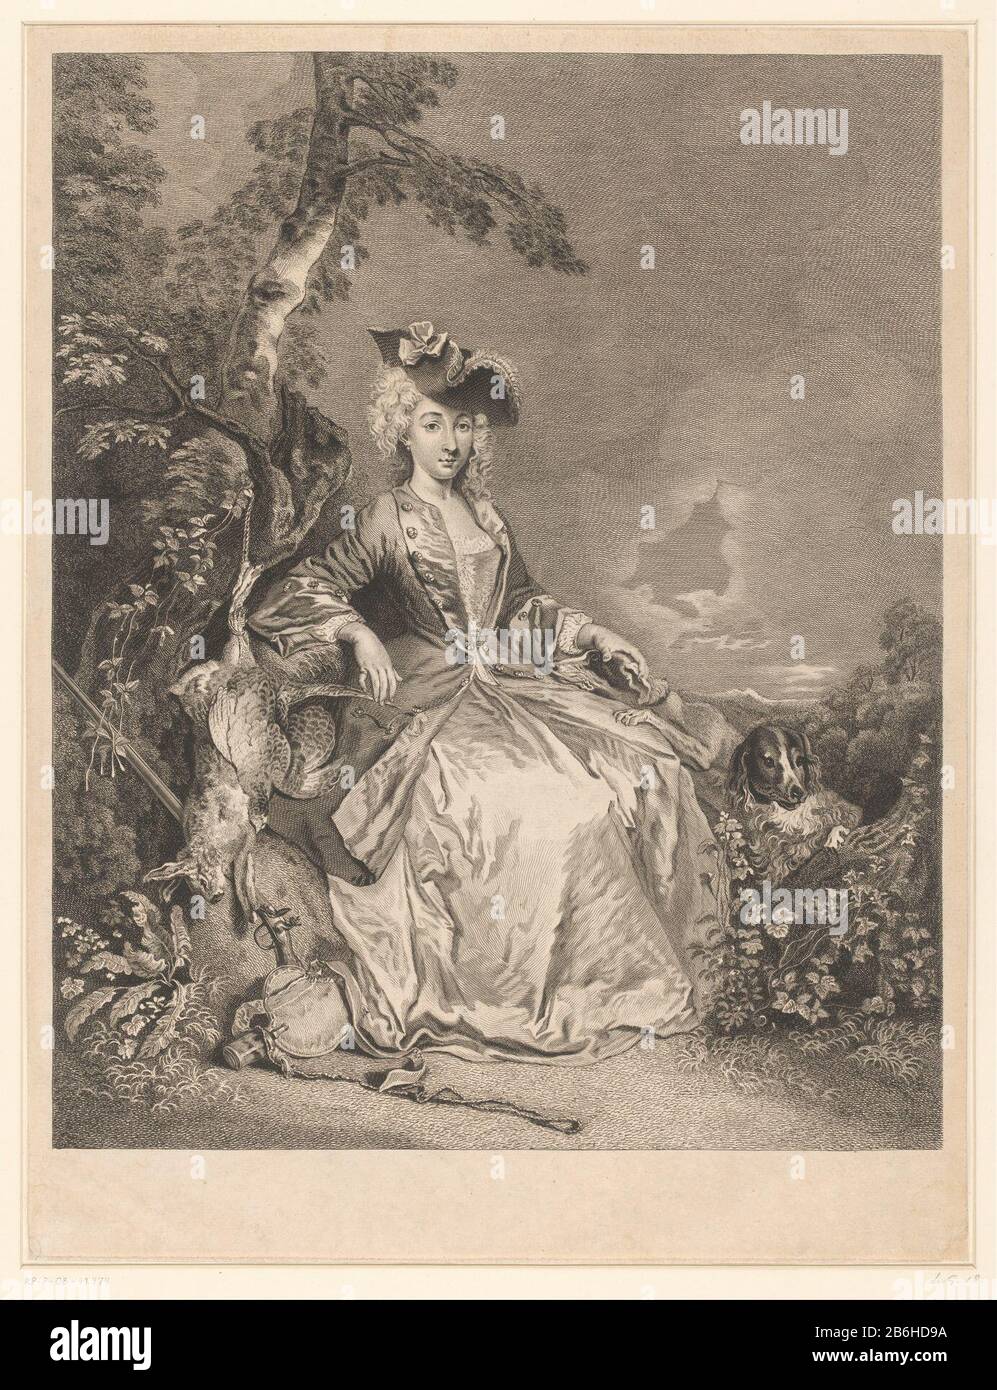 Dame after the hunt Lady after hunting object type: picture Item number: RP-P-OB-41.474Catalogusreferentie: IFF 18e siècle 5 Inscriptions / Brands: collector's mark, verso, stamped: Lugt 240 Manufacturer : printmaker: Benoit Audran (II) for painting Jean Antoine Watteauuitgever François Chéreau (I) provider of privilege: French crown place manufacture: printmaker: France Publisher: Paris Date: 1708 - 1729 Physical features: etching; proofing material: paper Technique: etching Dimensions: sheet: H 453 mm (Inner plate edge cut.) × W 343 mm (Inner plate edge cut.)  Subject: hare-hunting, rabbit-h Stock Photo